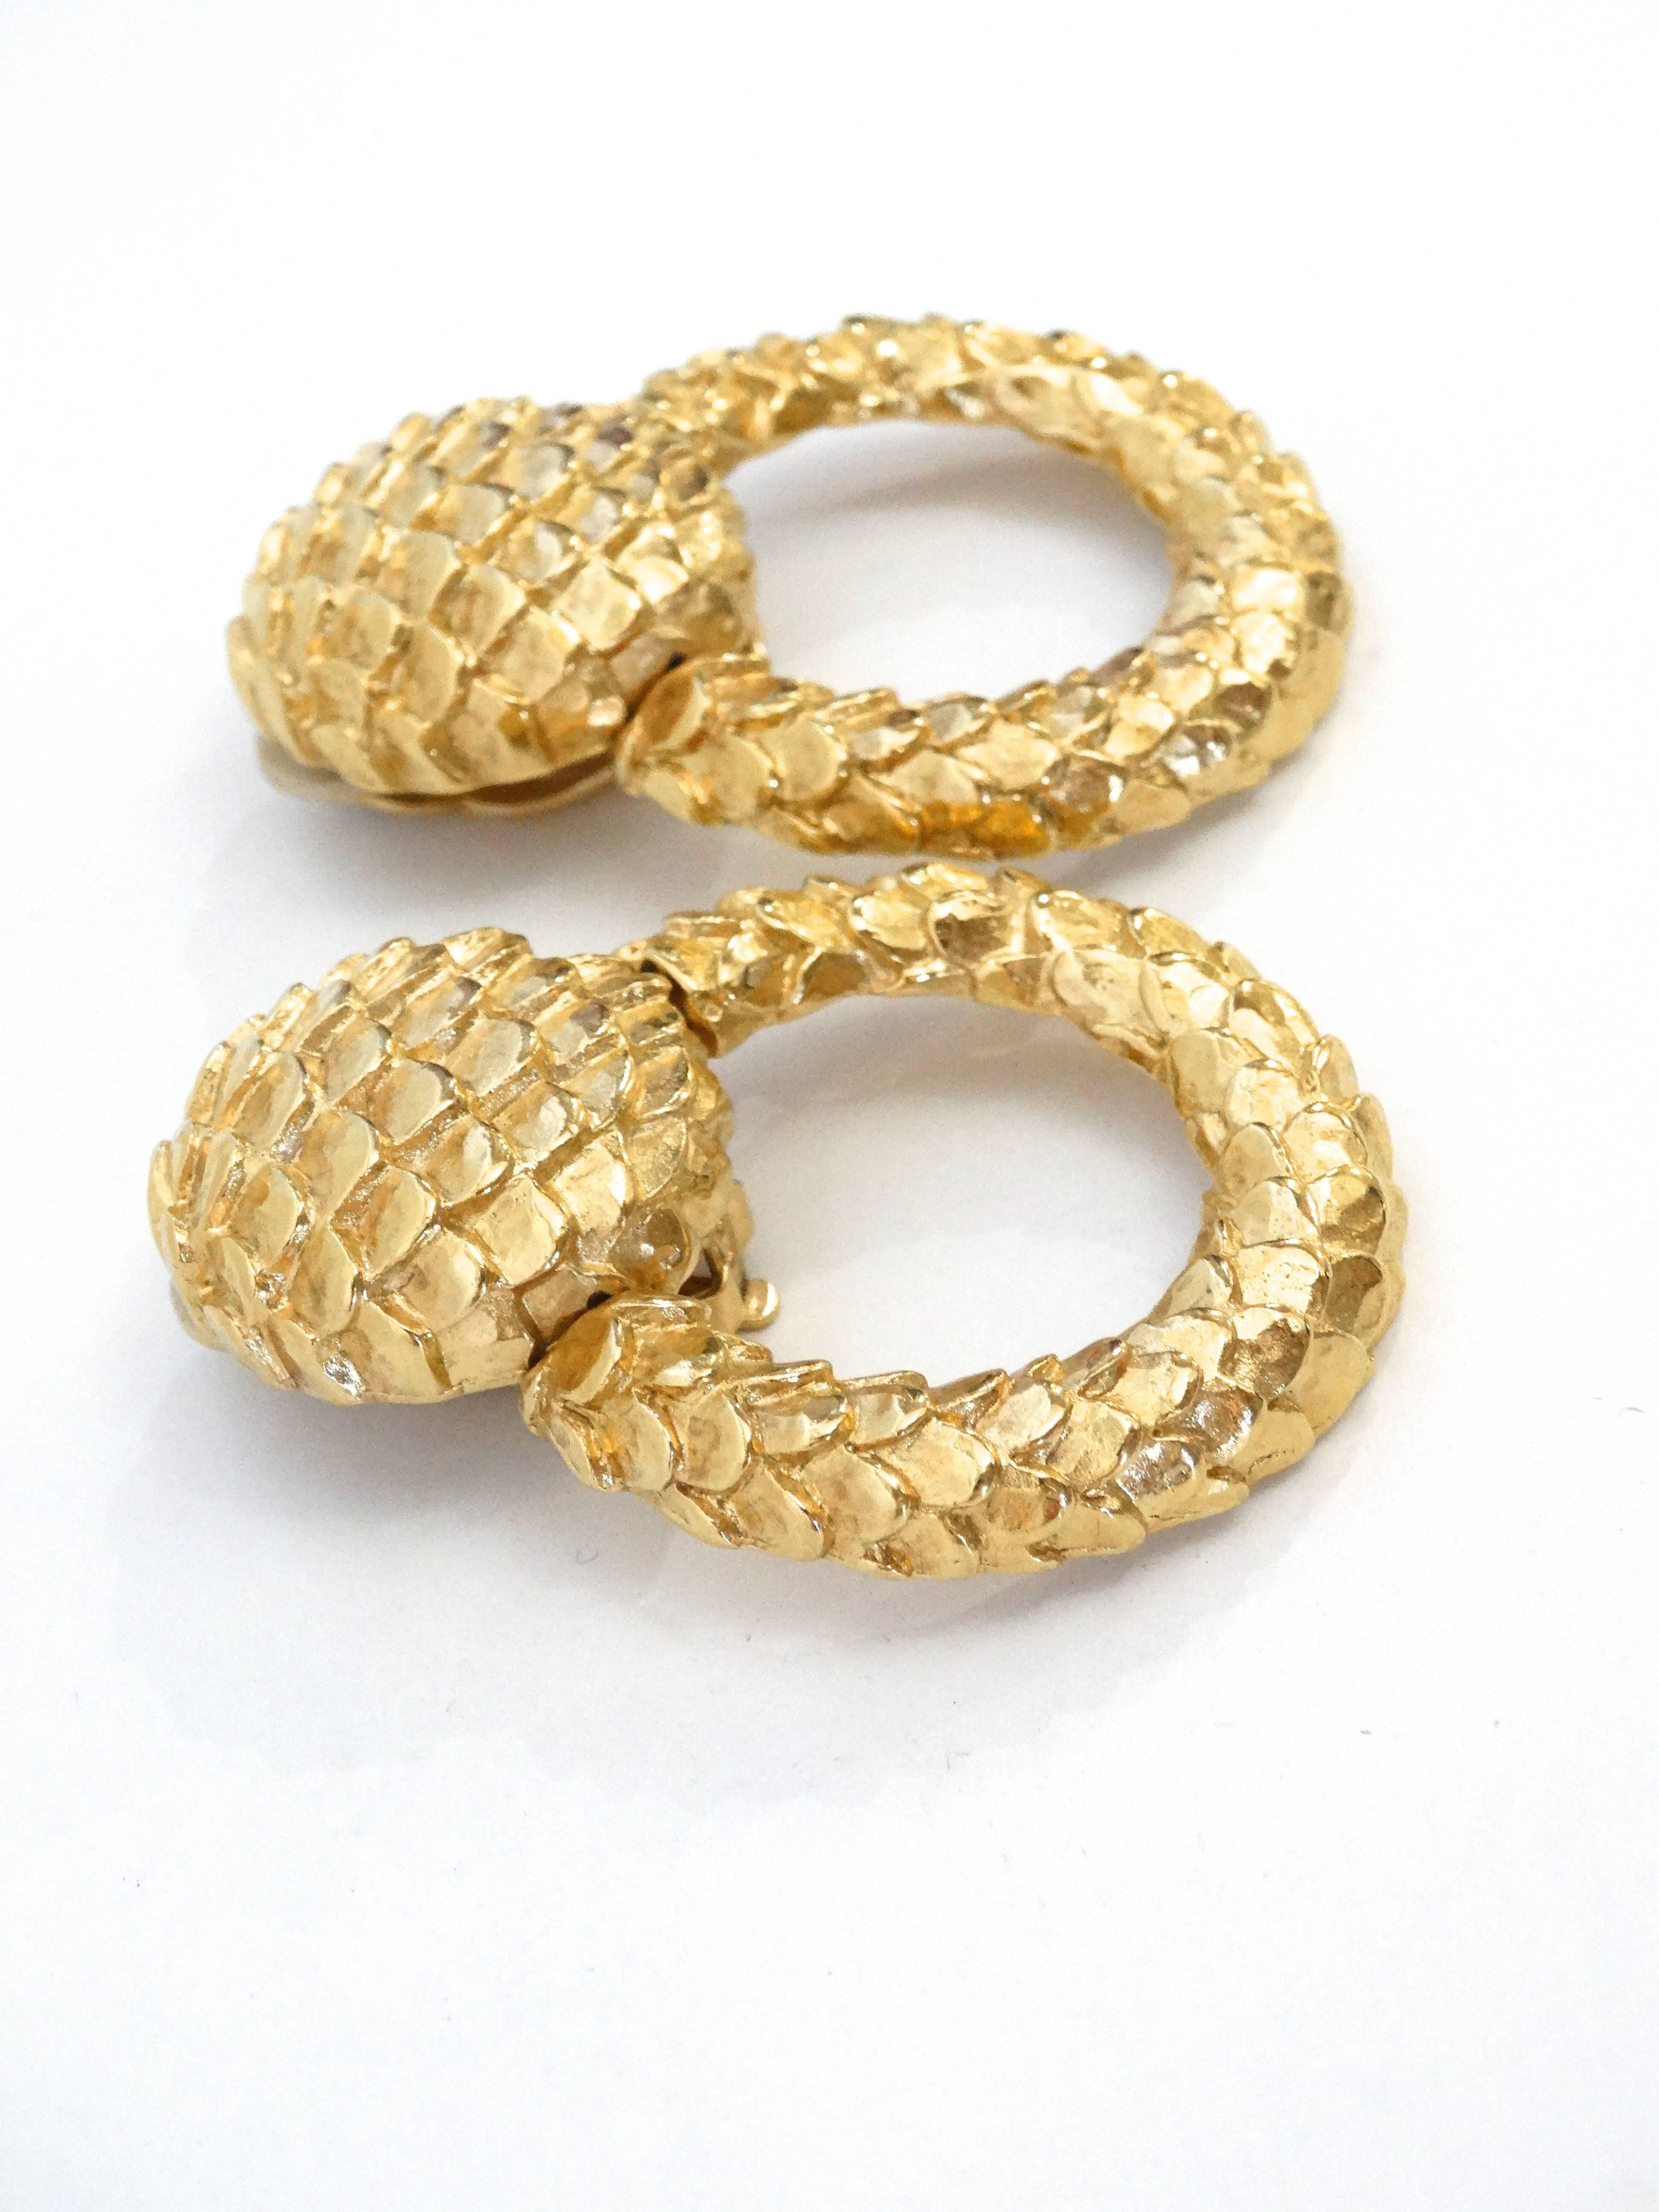 Statement hoops by Givenchy circa 1980s with a magnified snakeskin texture. Plated in gold, these hoops are sure to get noticed! 

Measurement 

3